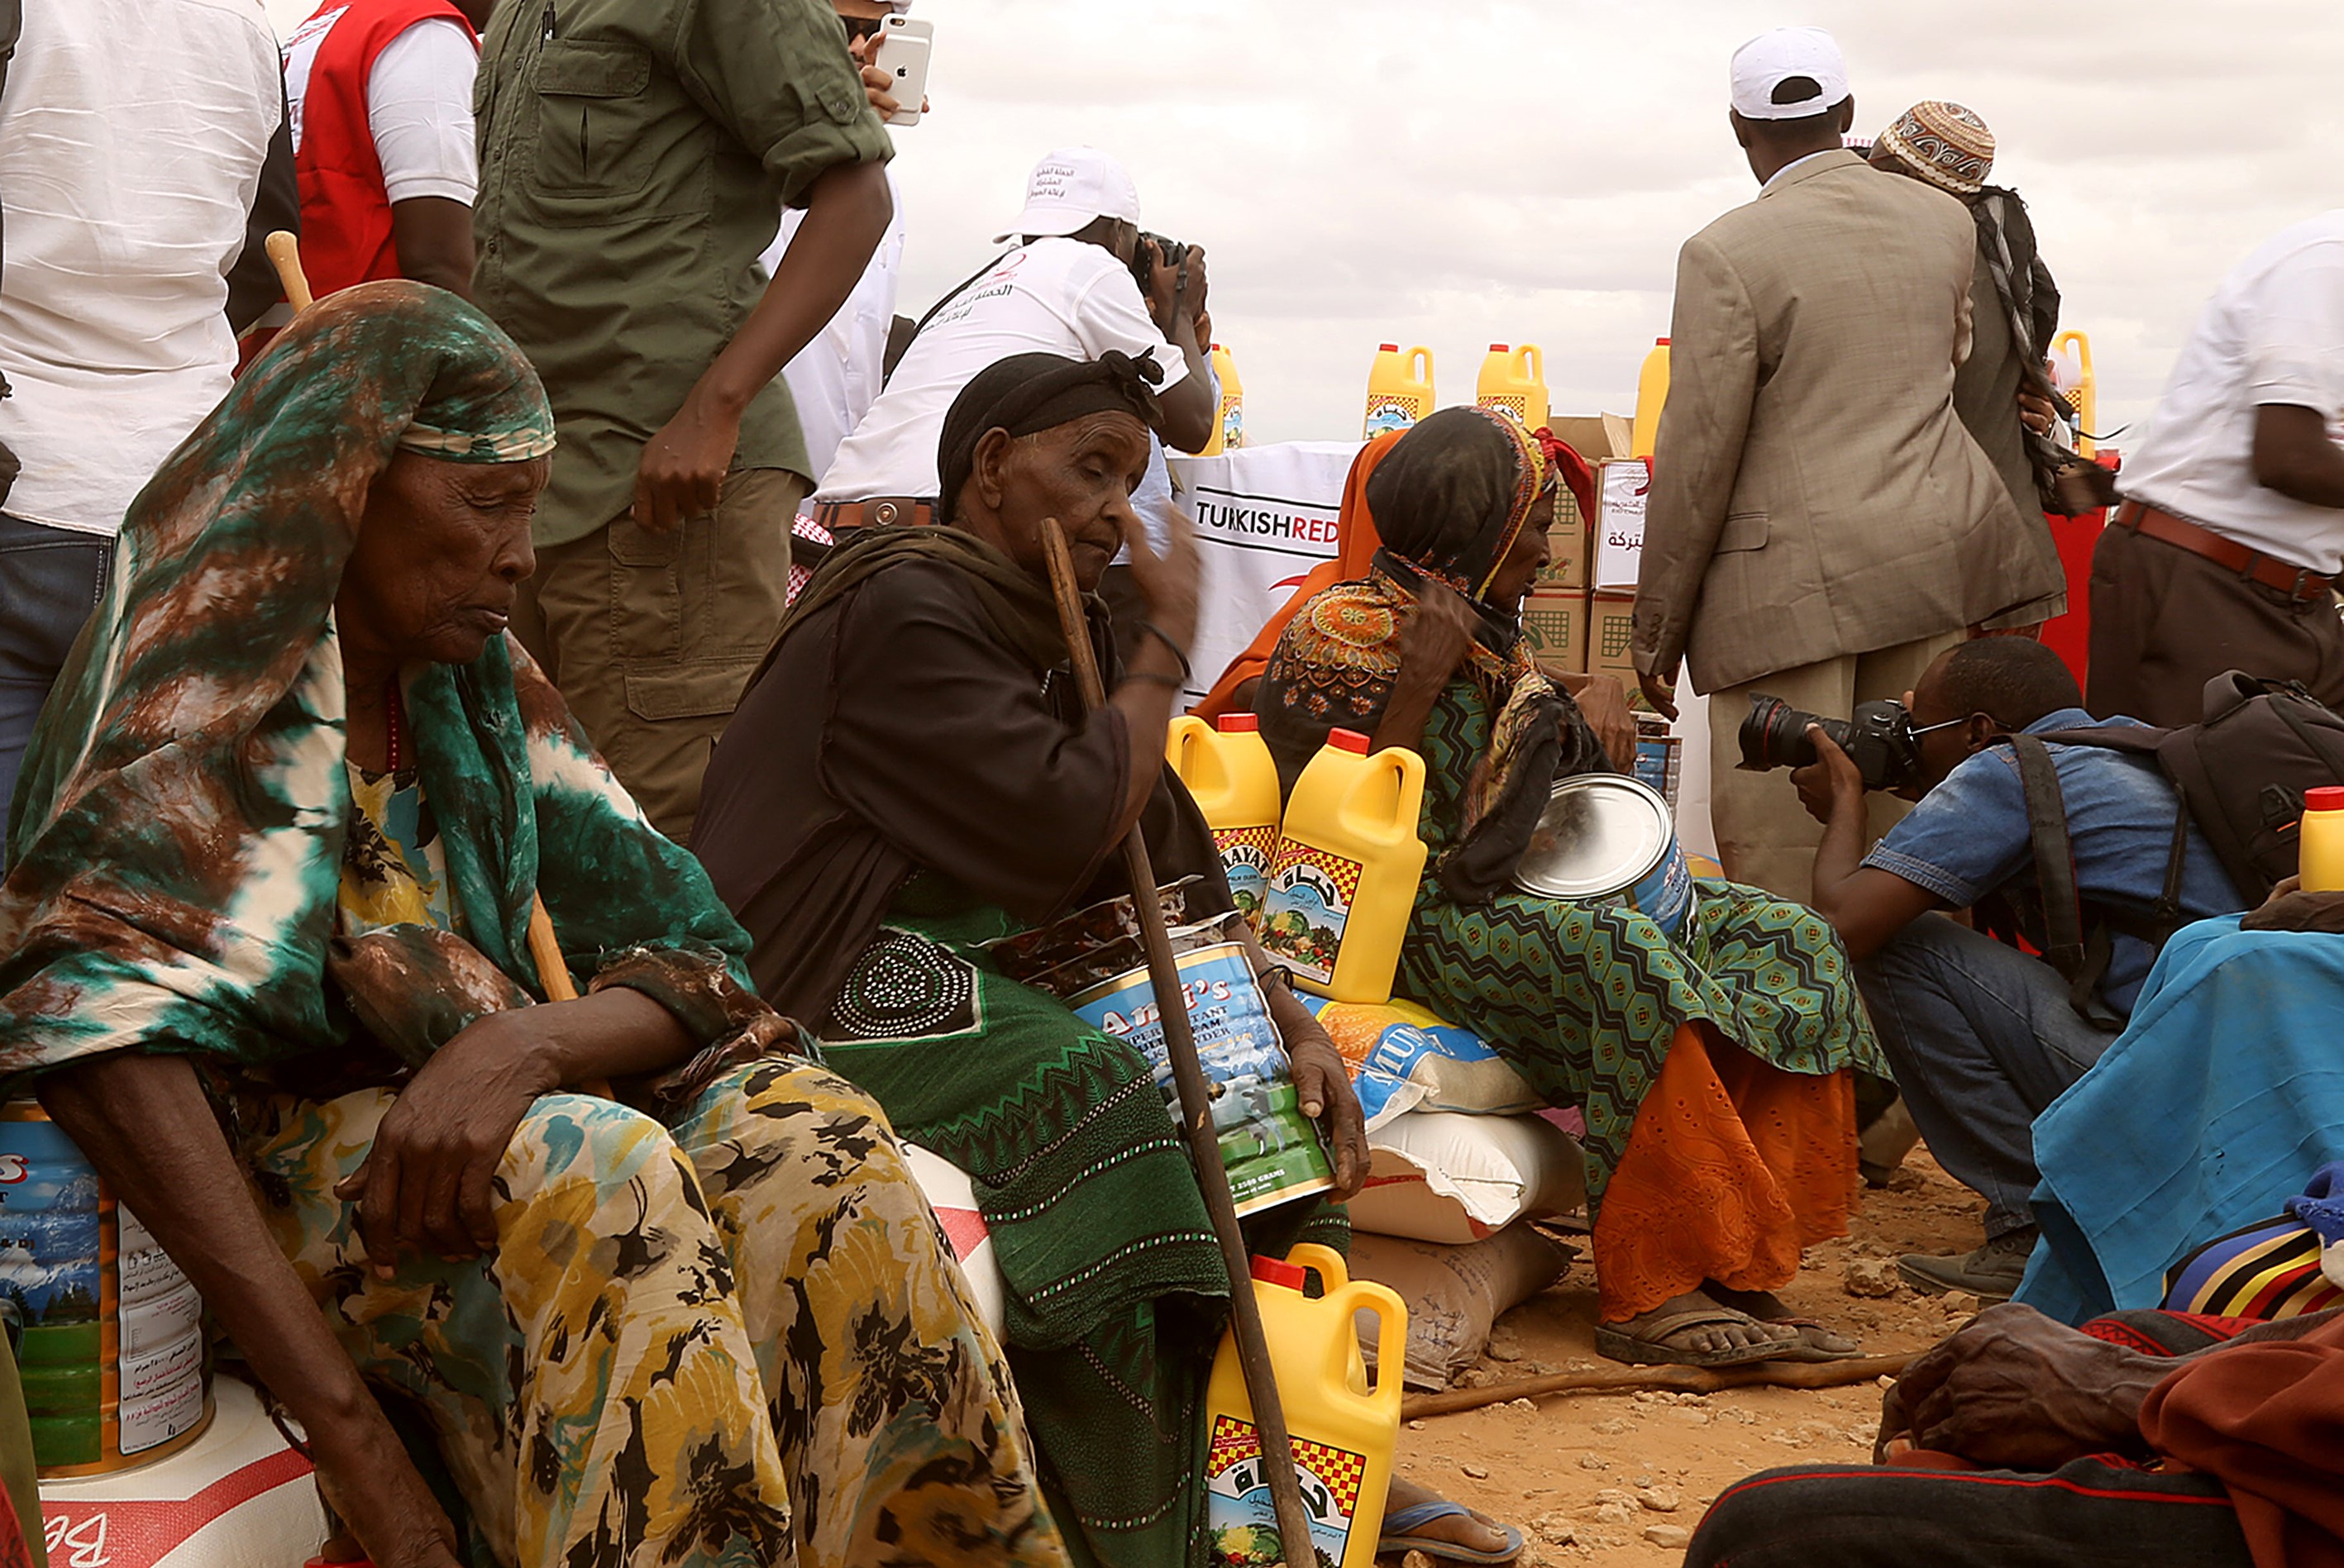 Humanitarian aid to flood and clash victims in Somalia